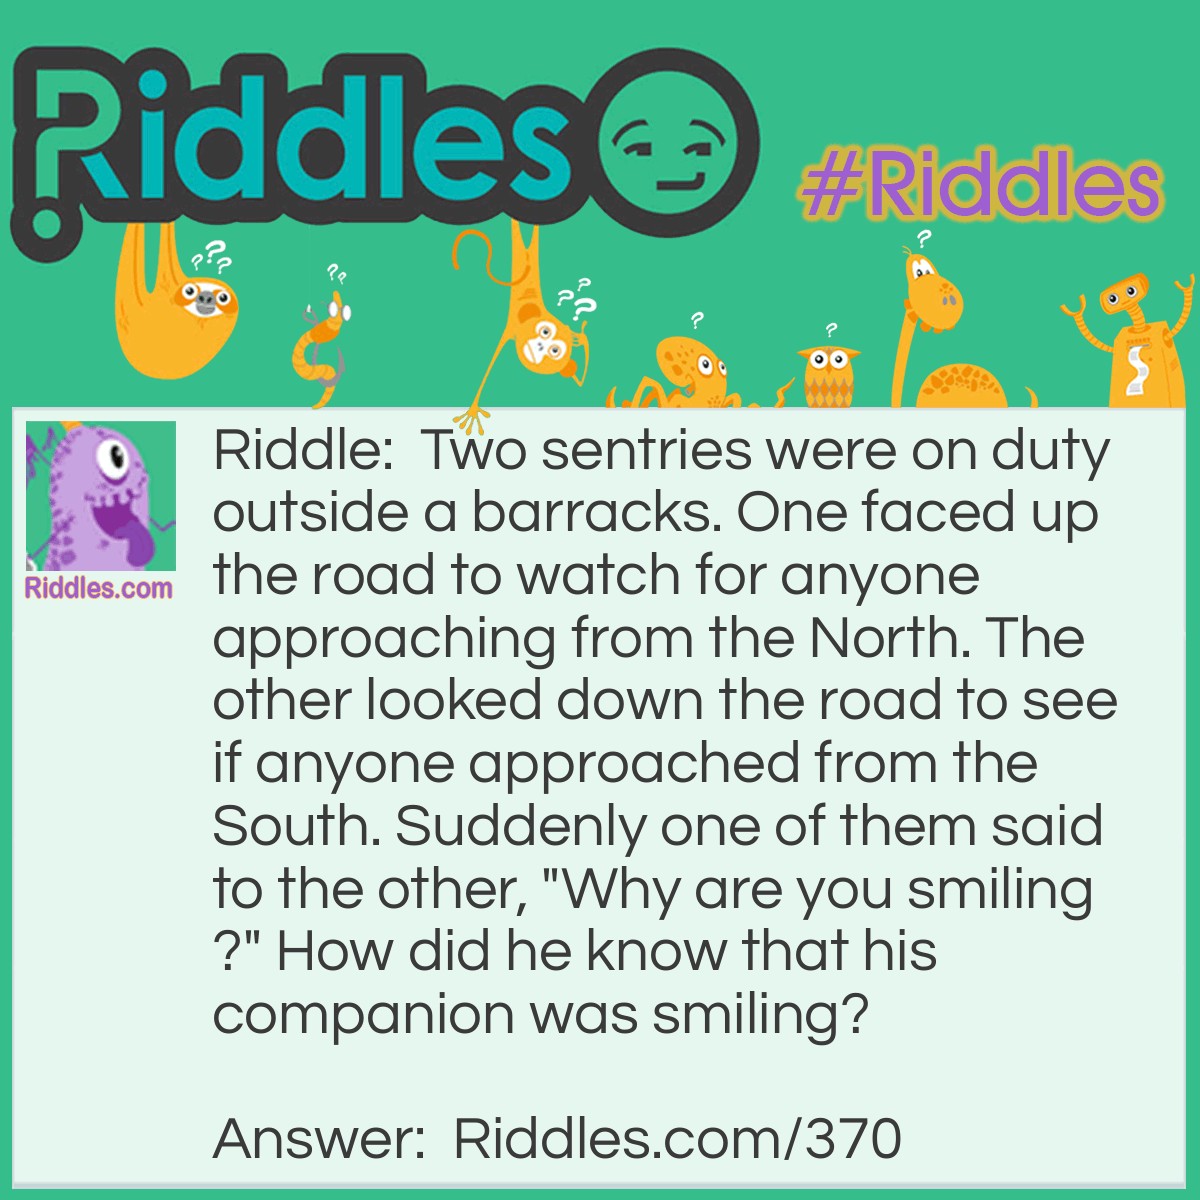 Riddle: Two sentries were on duty outside a barracks. One faced up the road to watch for anyone approaching from the North. The other looked down the road to see if anyone approached from the South. Suddenly one of them said to the other, "Why are you smiling?" How did he know that his companion was <a href="../../../funny-riddles">smiling</a>? Answer: Although the guards were looking in opposite directions, they were not back to back. They were facing each other.